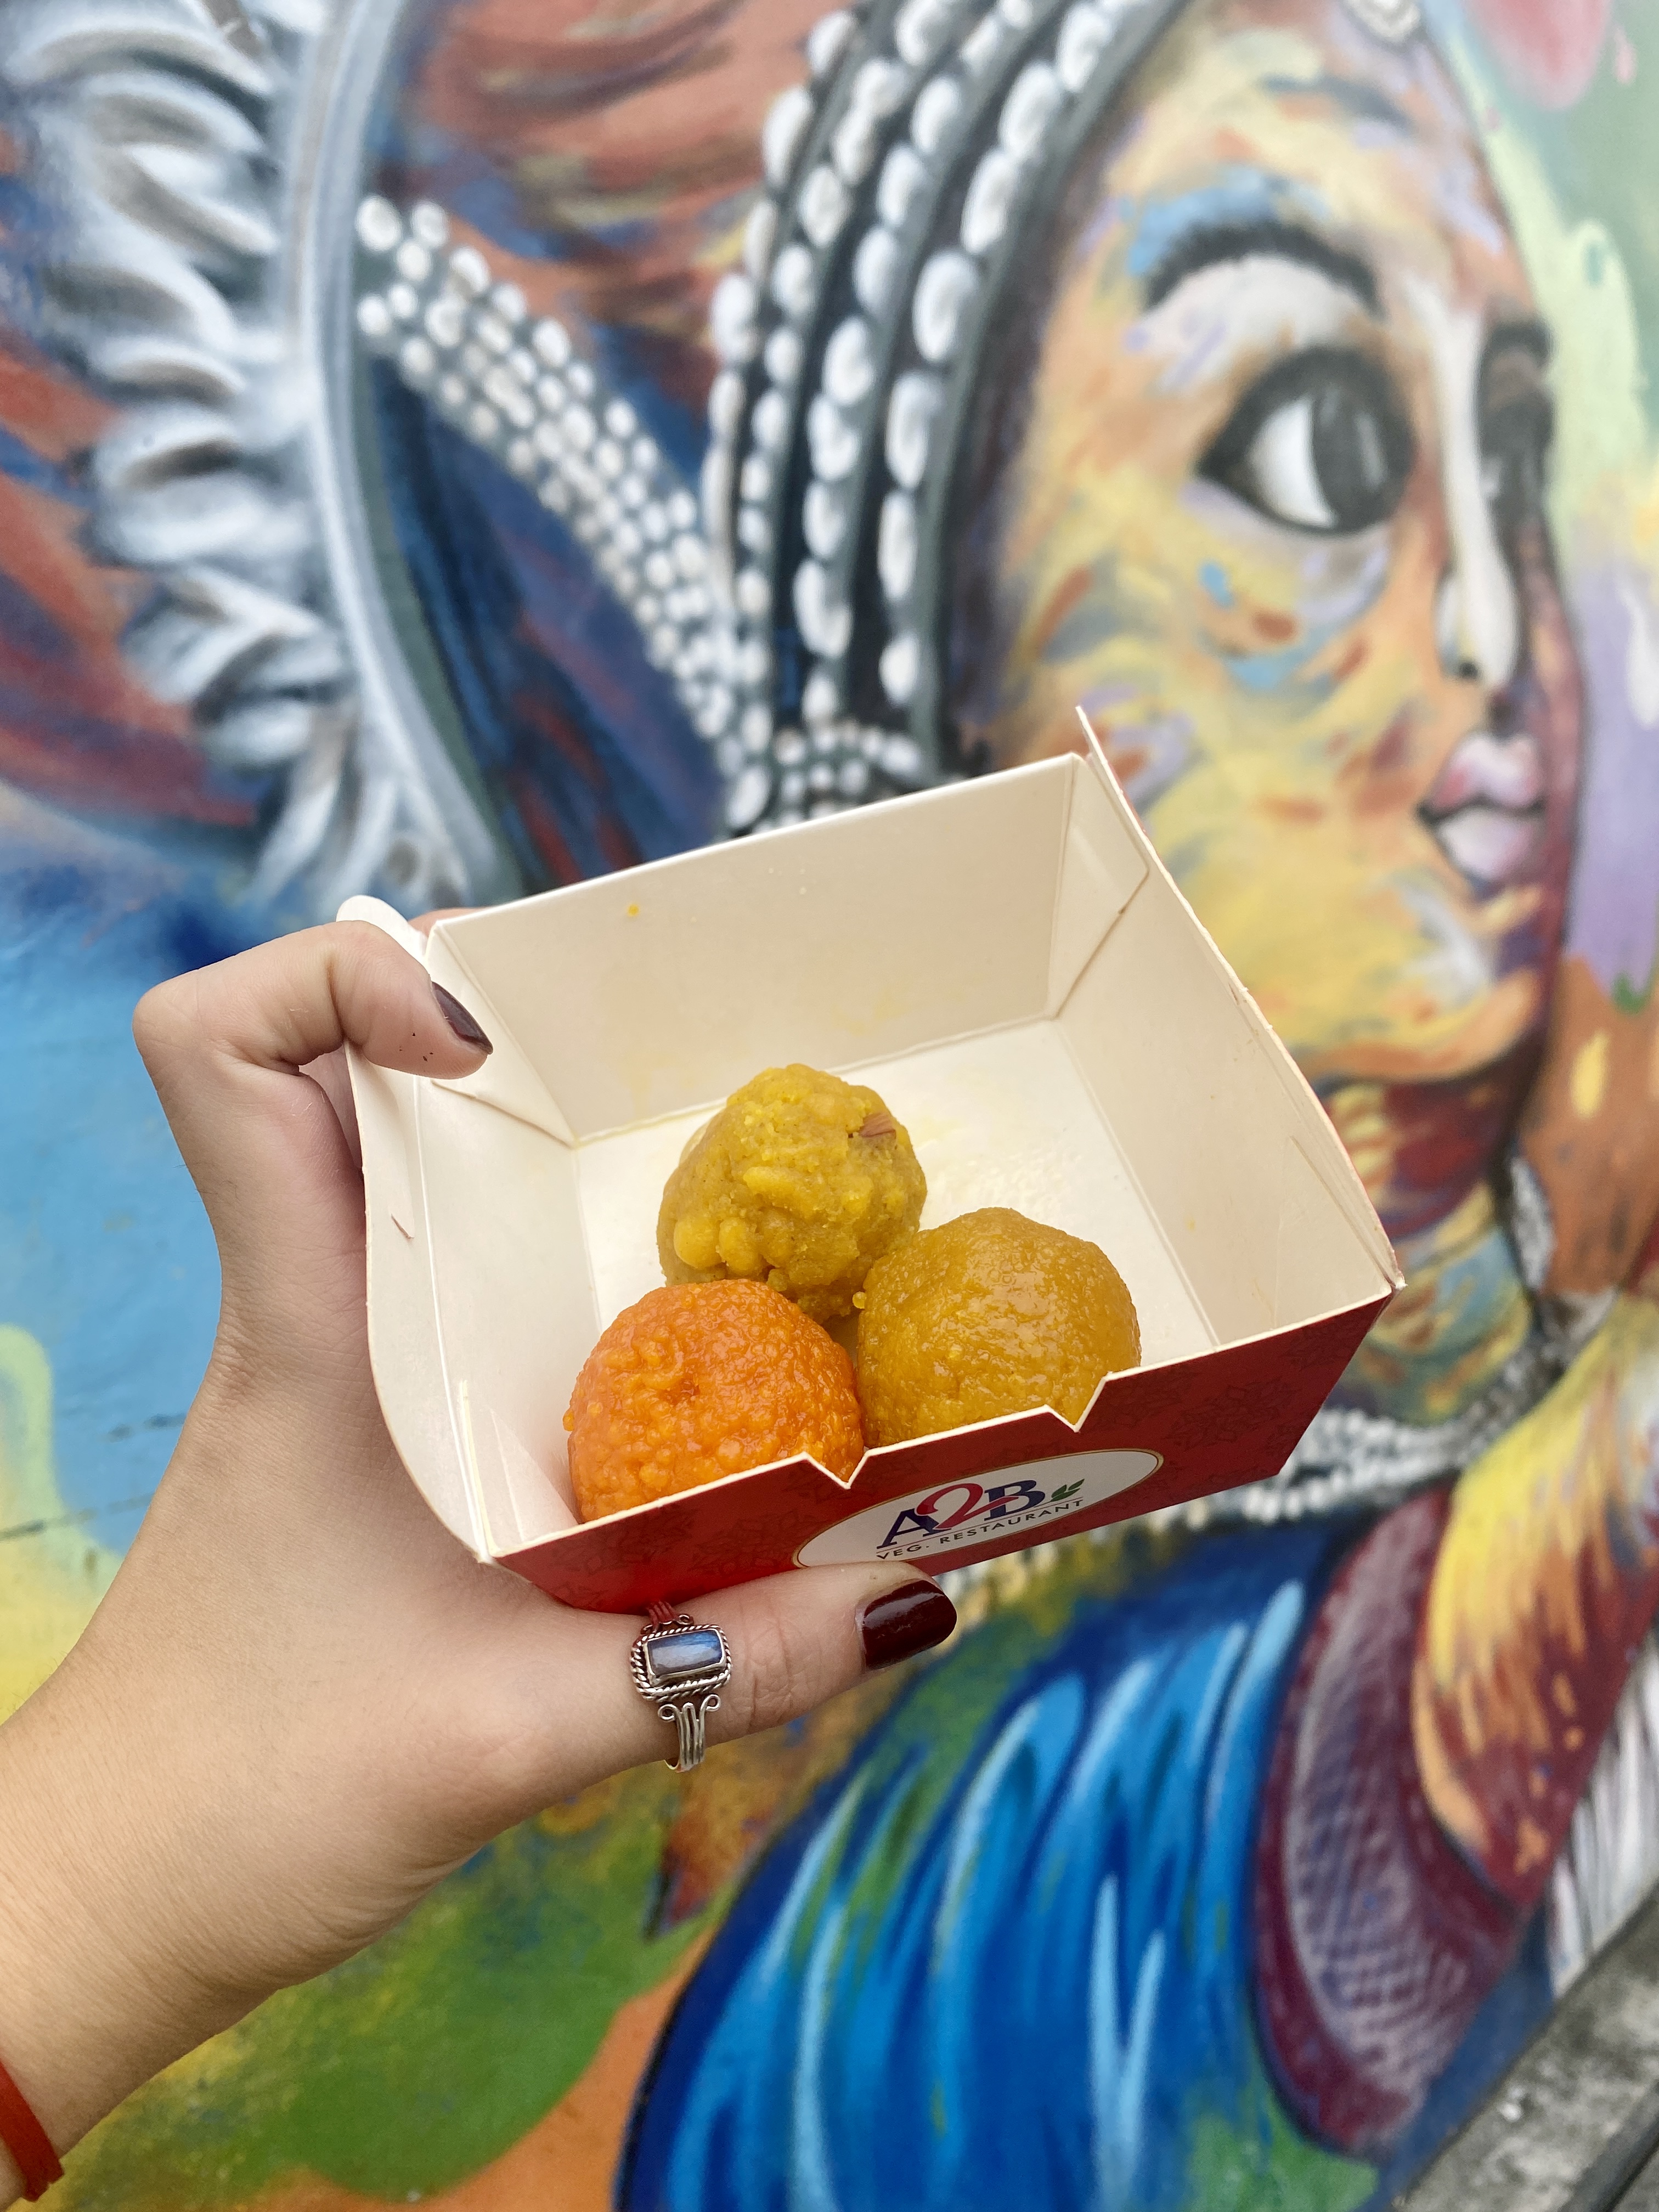 image of 3 yellow and orange spherical snacks against a colorful wall